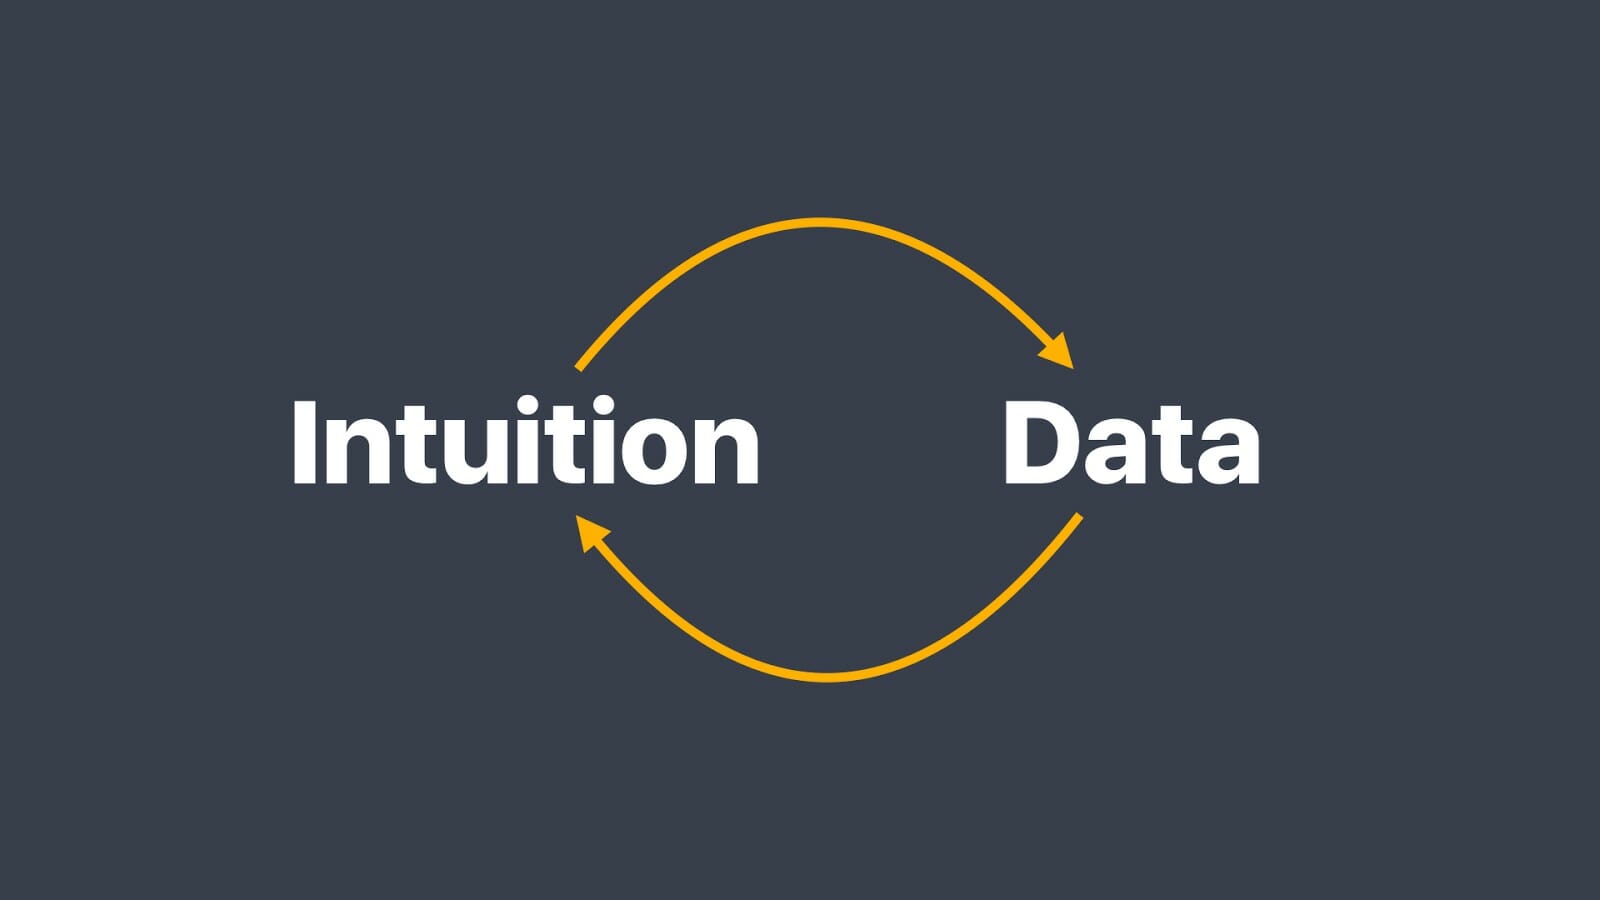 a cycle of intuition and data feeding into each other